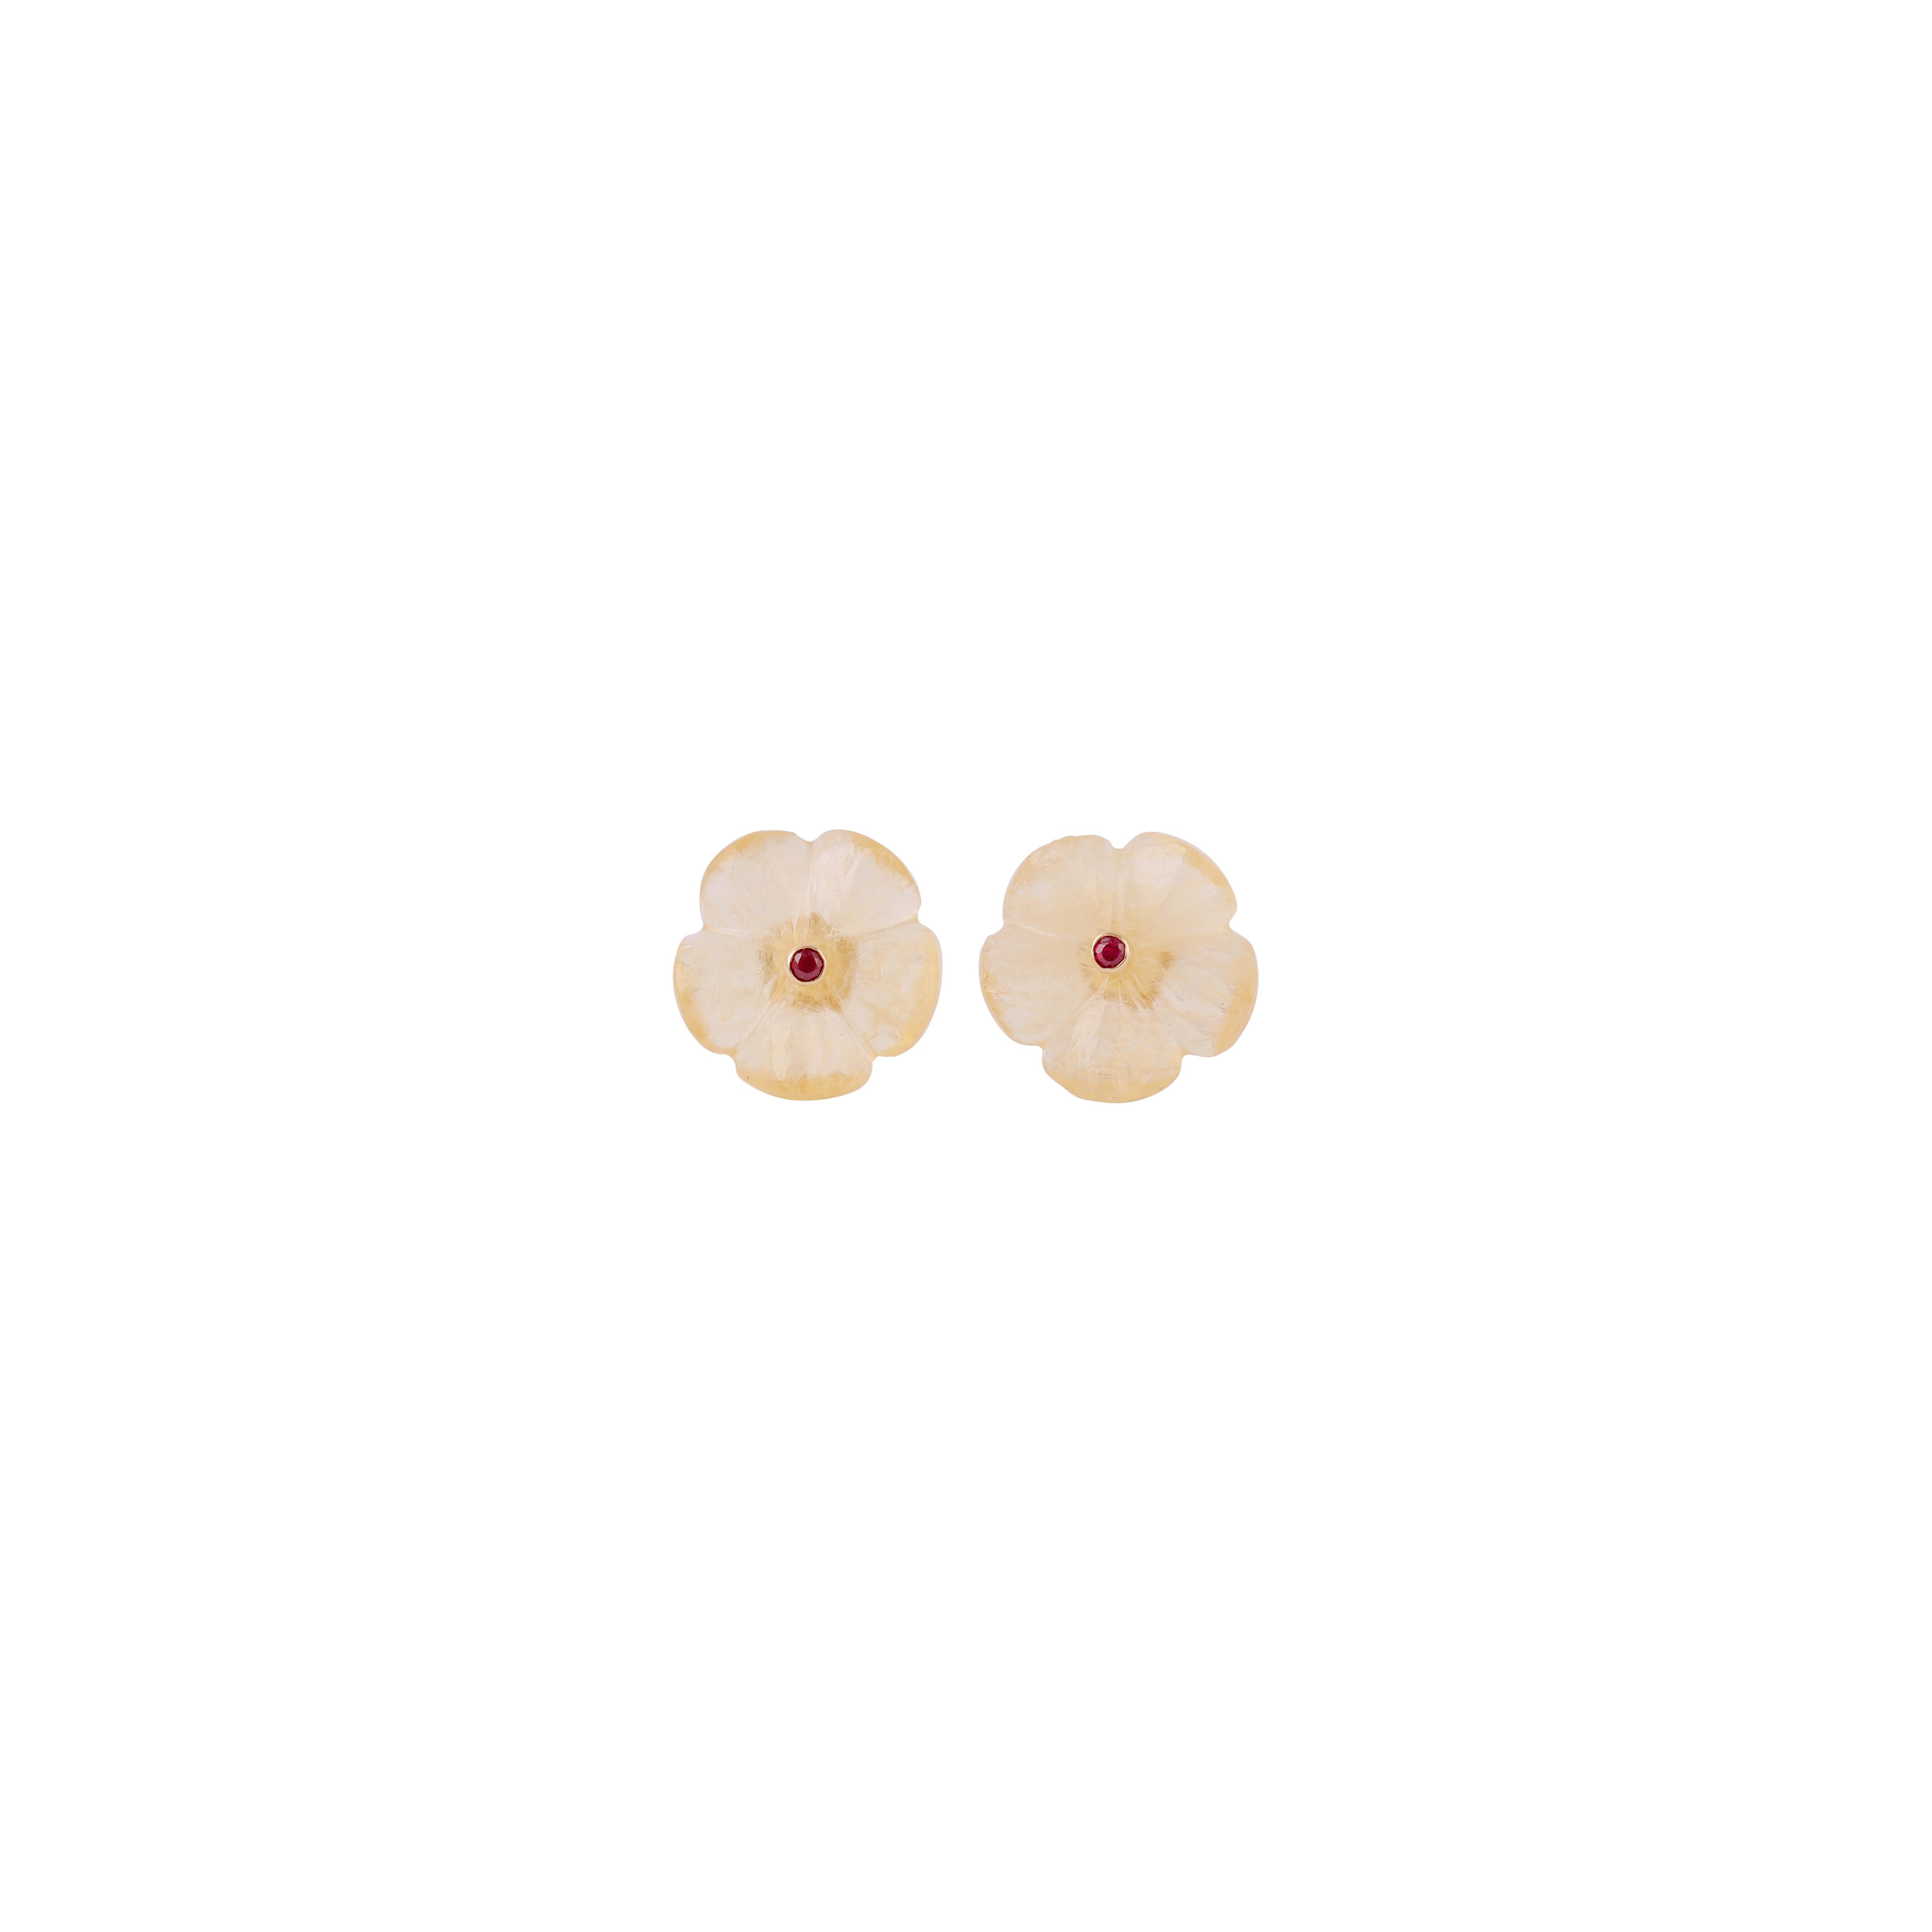 Elegant Rose Quartz stud earrings that are fun to wear. A classic pair of earrings with a designer touch with its setting in 18K gold, giving it a true Fun look.

7.18 Carat Rose Quartz Stud Earrings in 18 Karat Gold

Rose Quartz : 7.18 carats